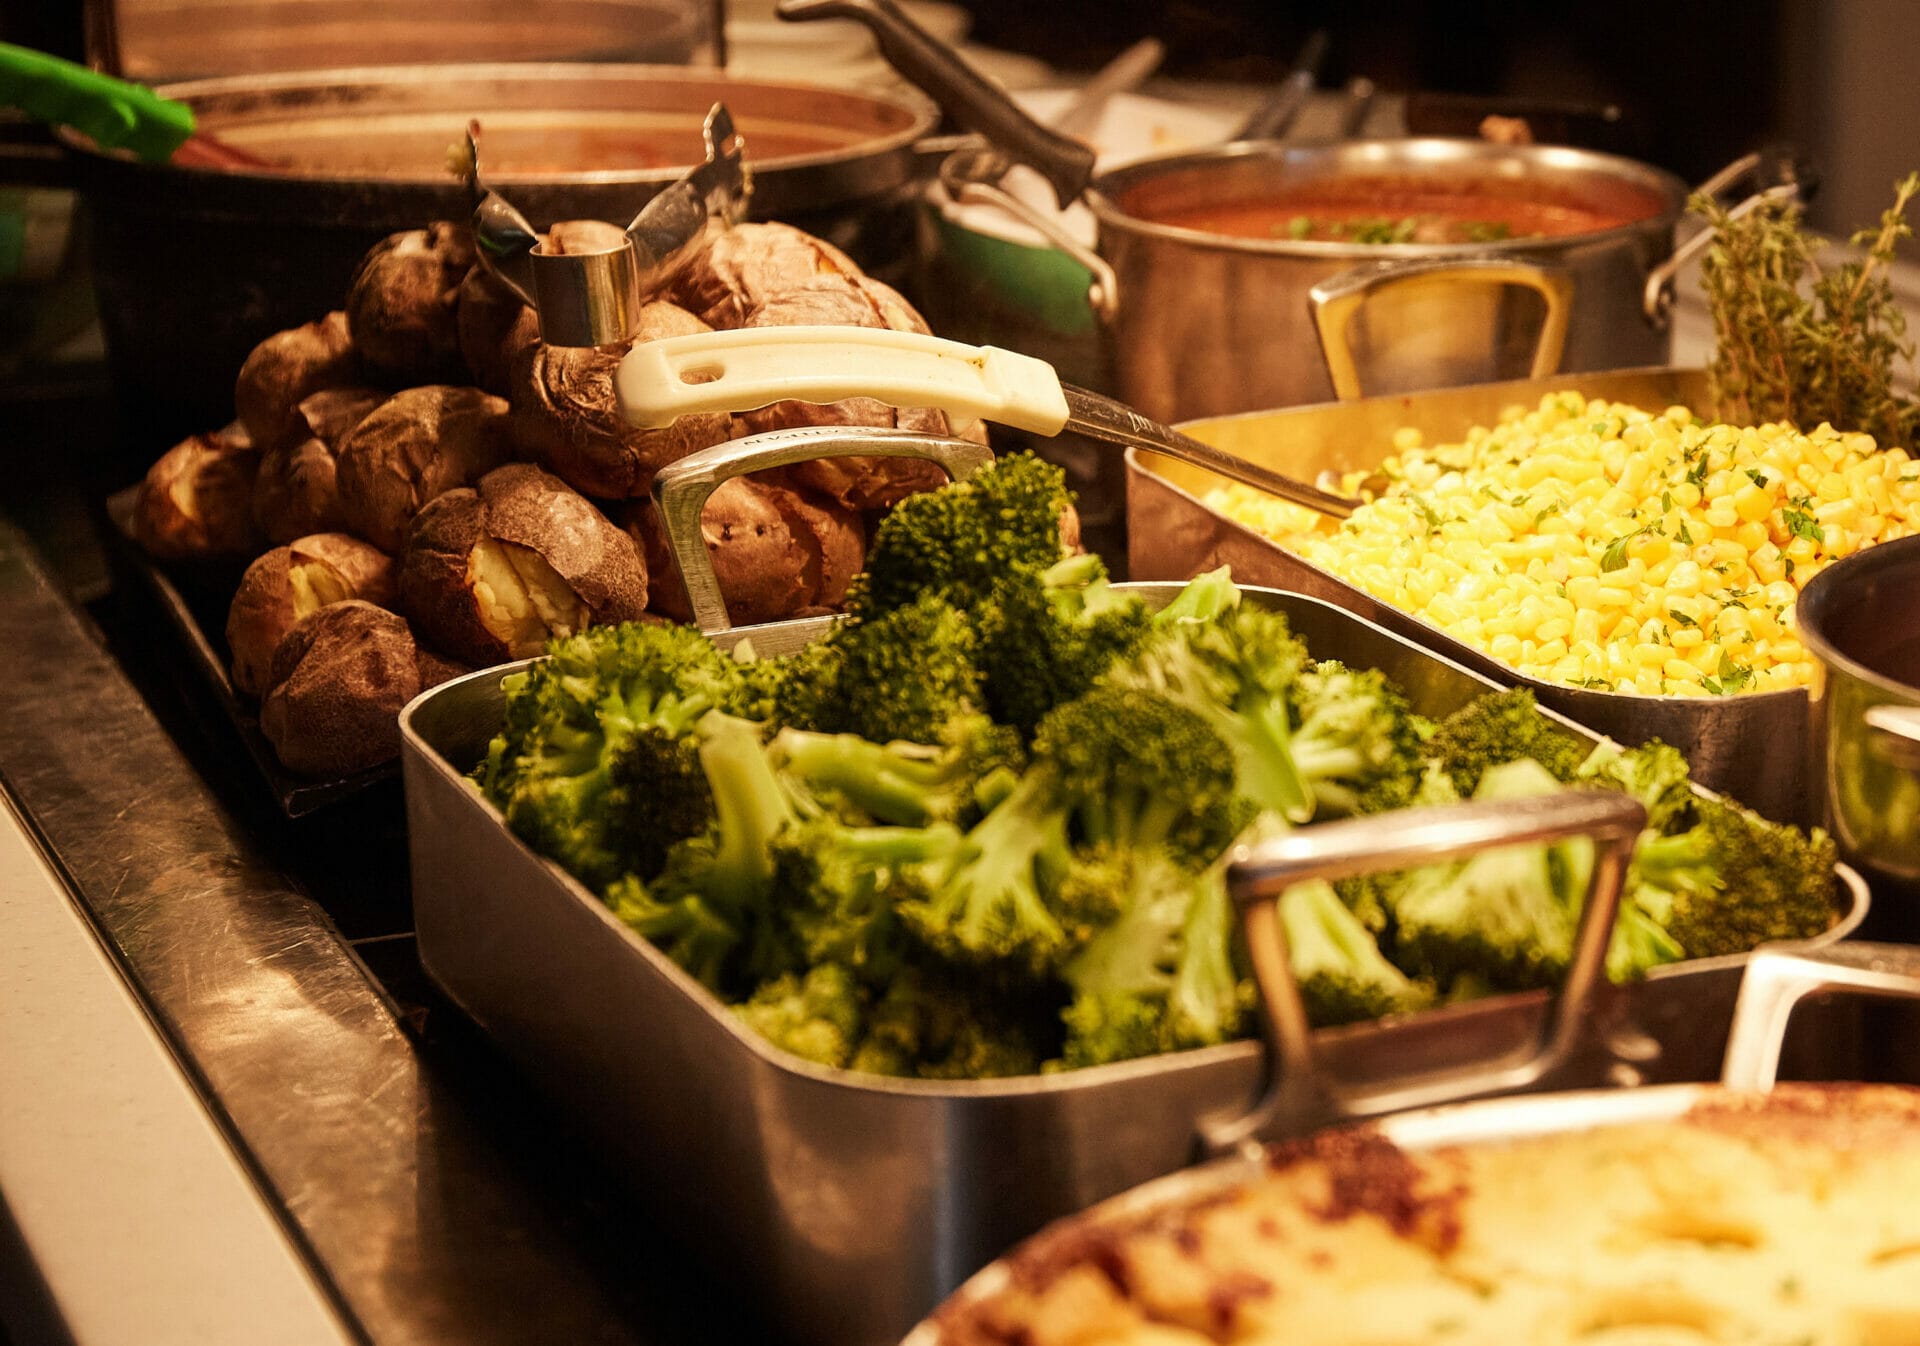 The food available for school lunches at The Blue Coat School including broccoli, jacket potatoes and rice.